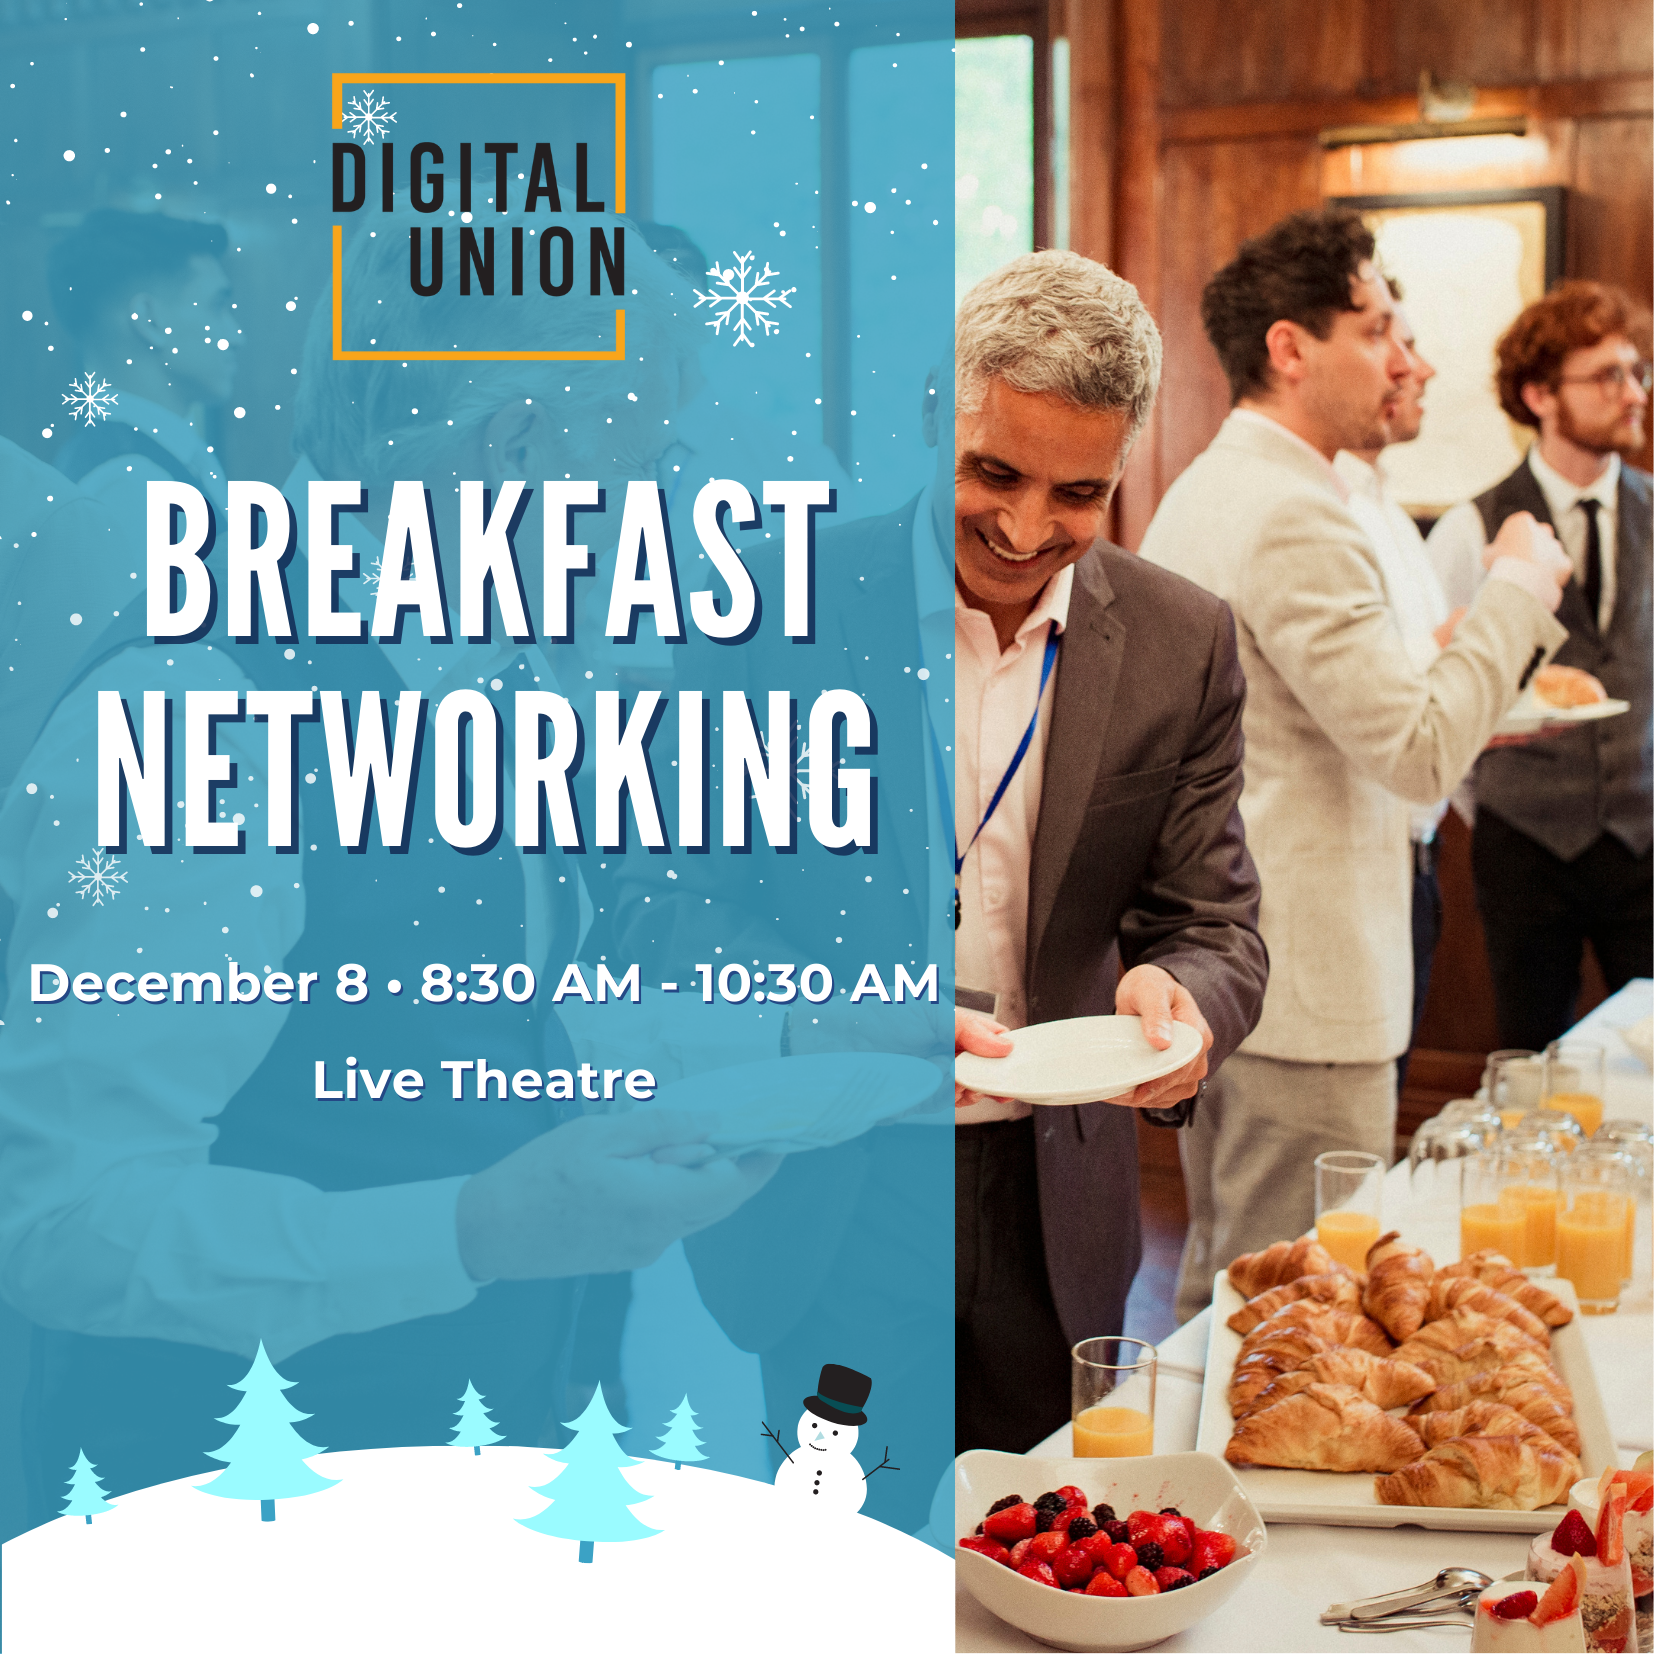 https://generator.org.uk/wp-content/uploads/2021/11/Digital-Union-Breakfast-Networking-in-person.png